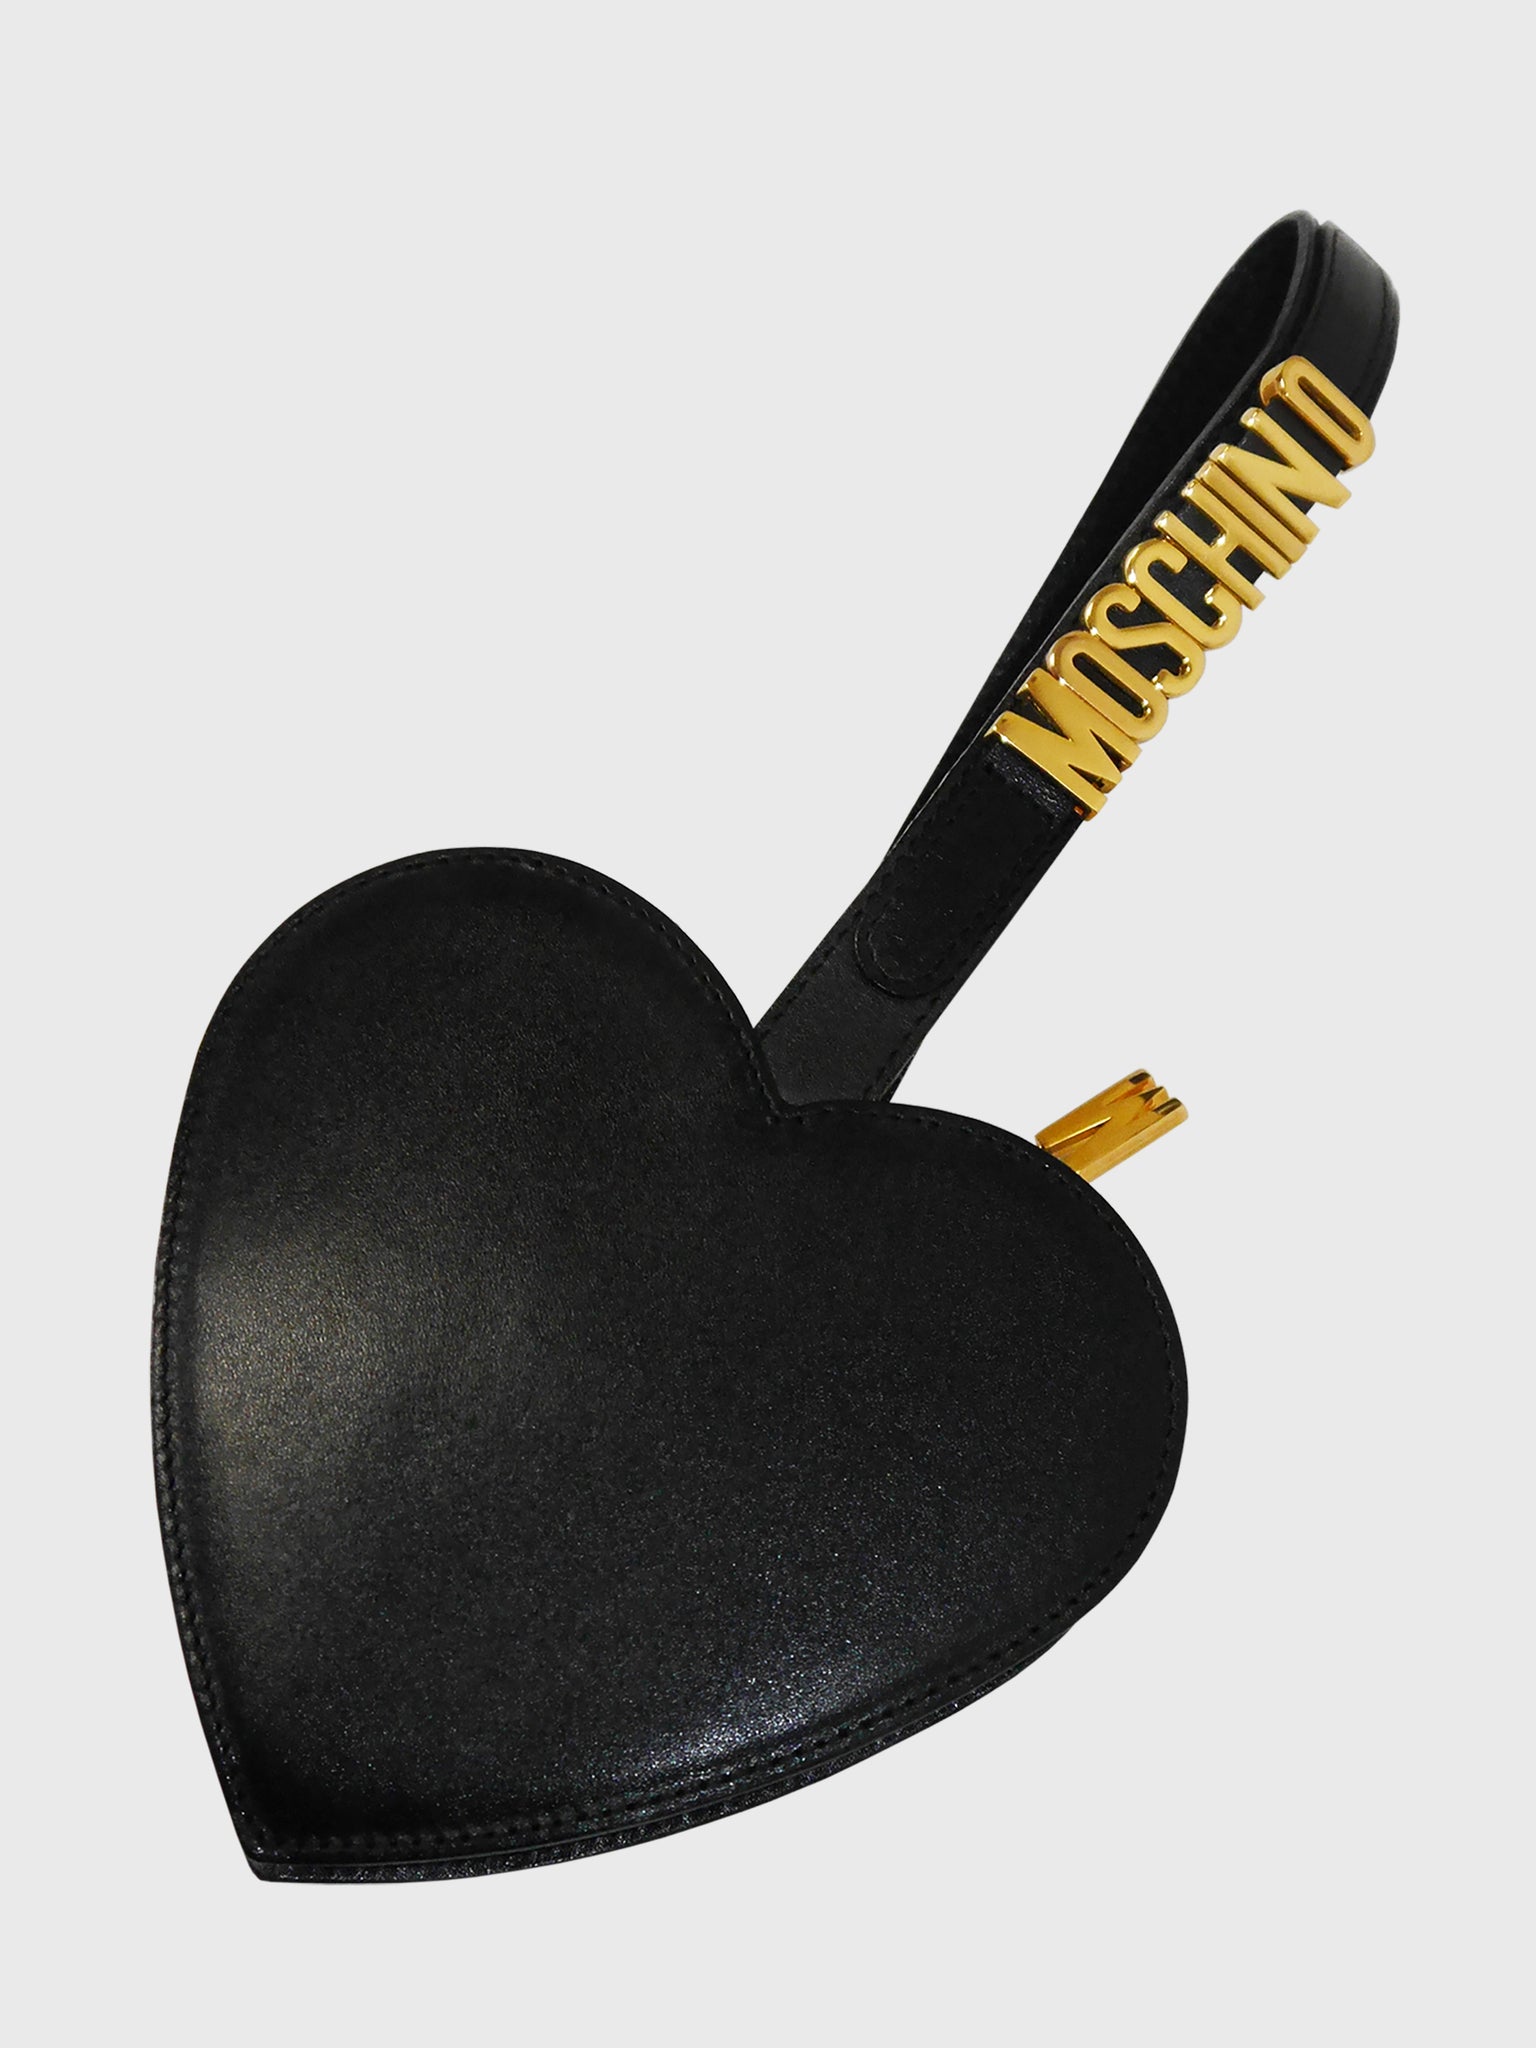 MOSCHINO by Redwall 1990s Vintage Black Heart Wristlet Evening Bag